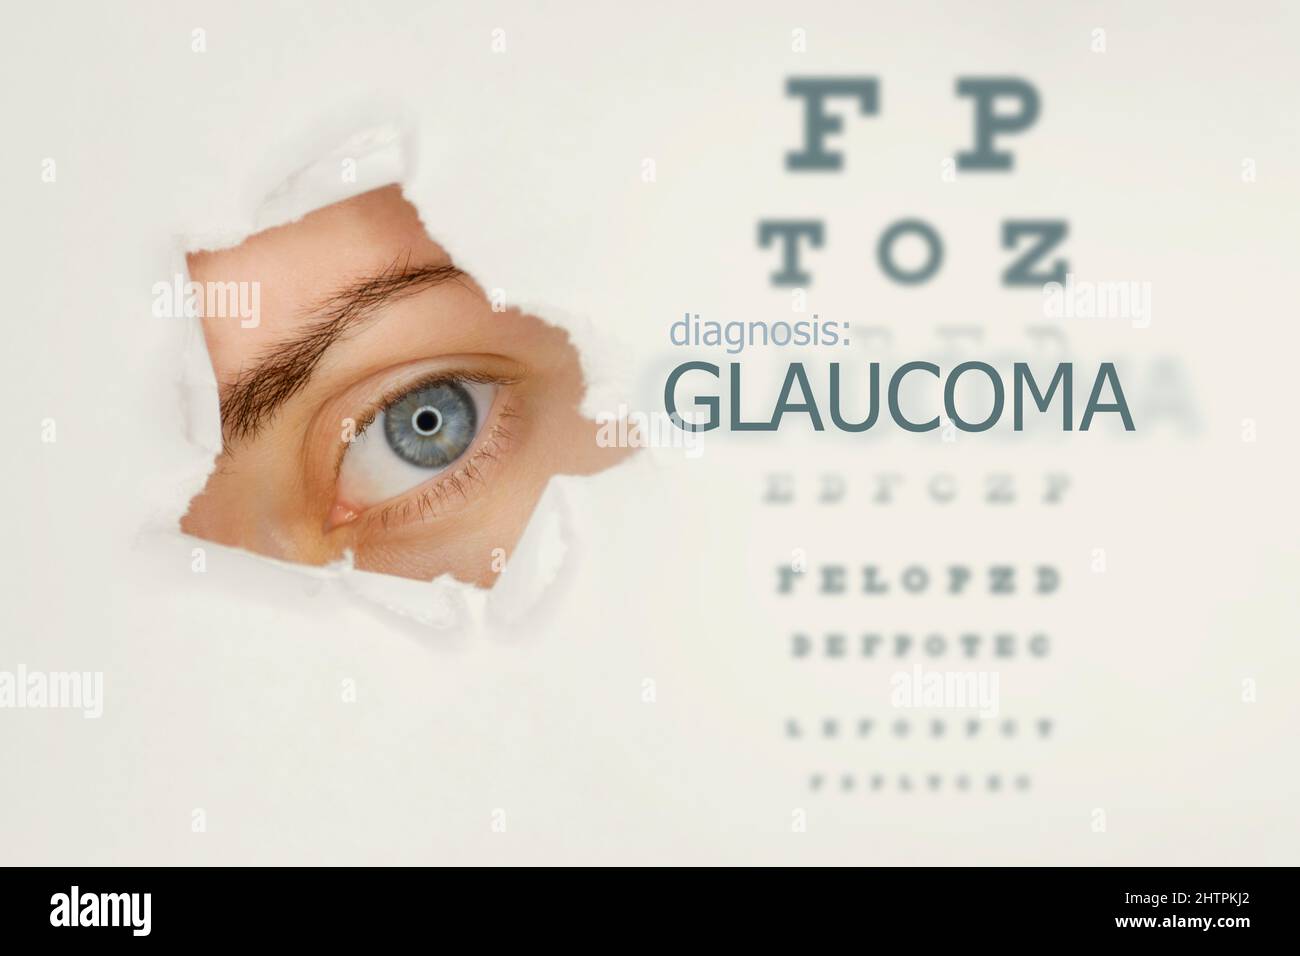 Glaucoma disease poster with eye test and blue eye on right. Studio grey background Stock Photo